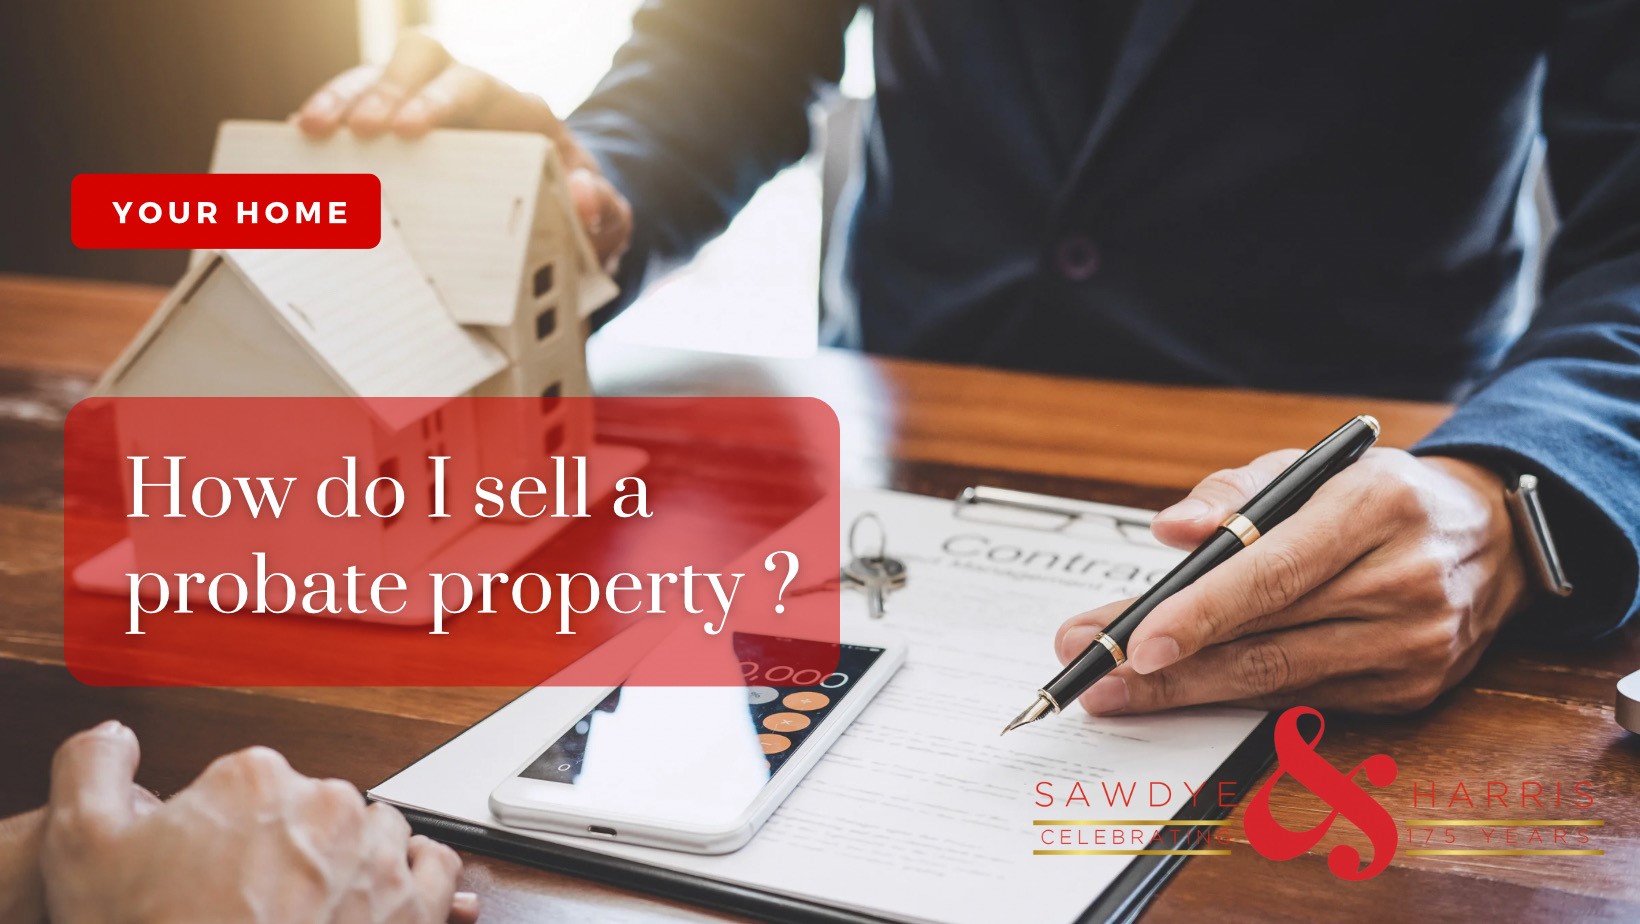 How do I sell a probate property?